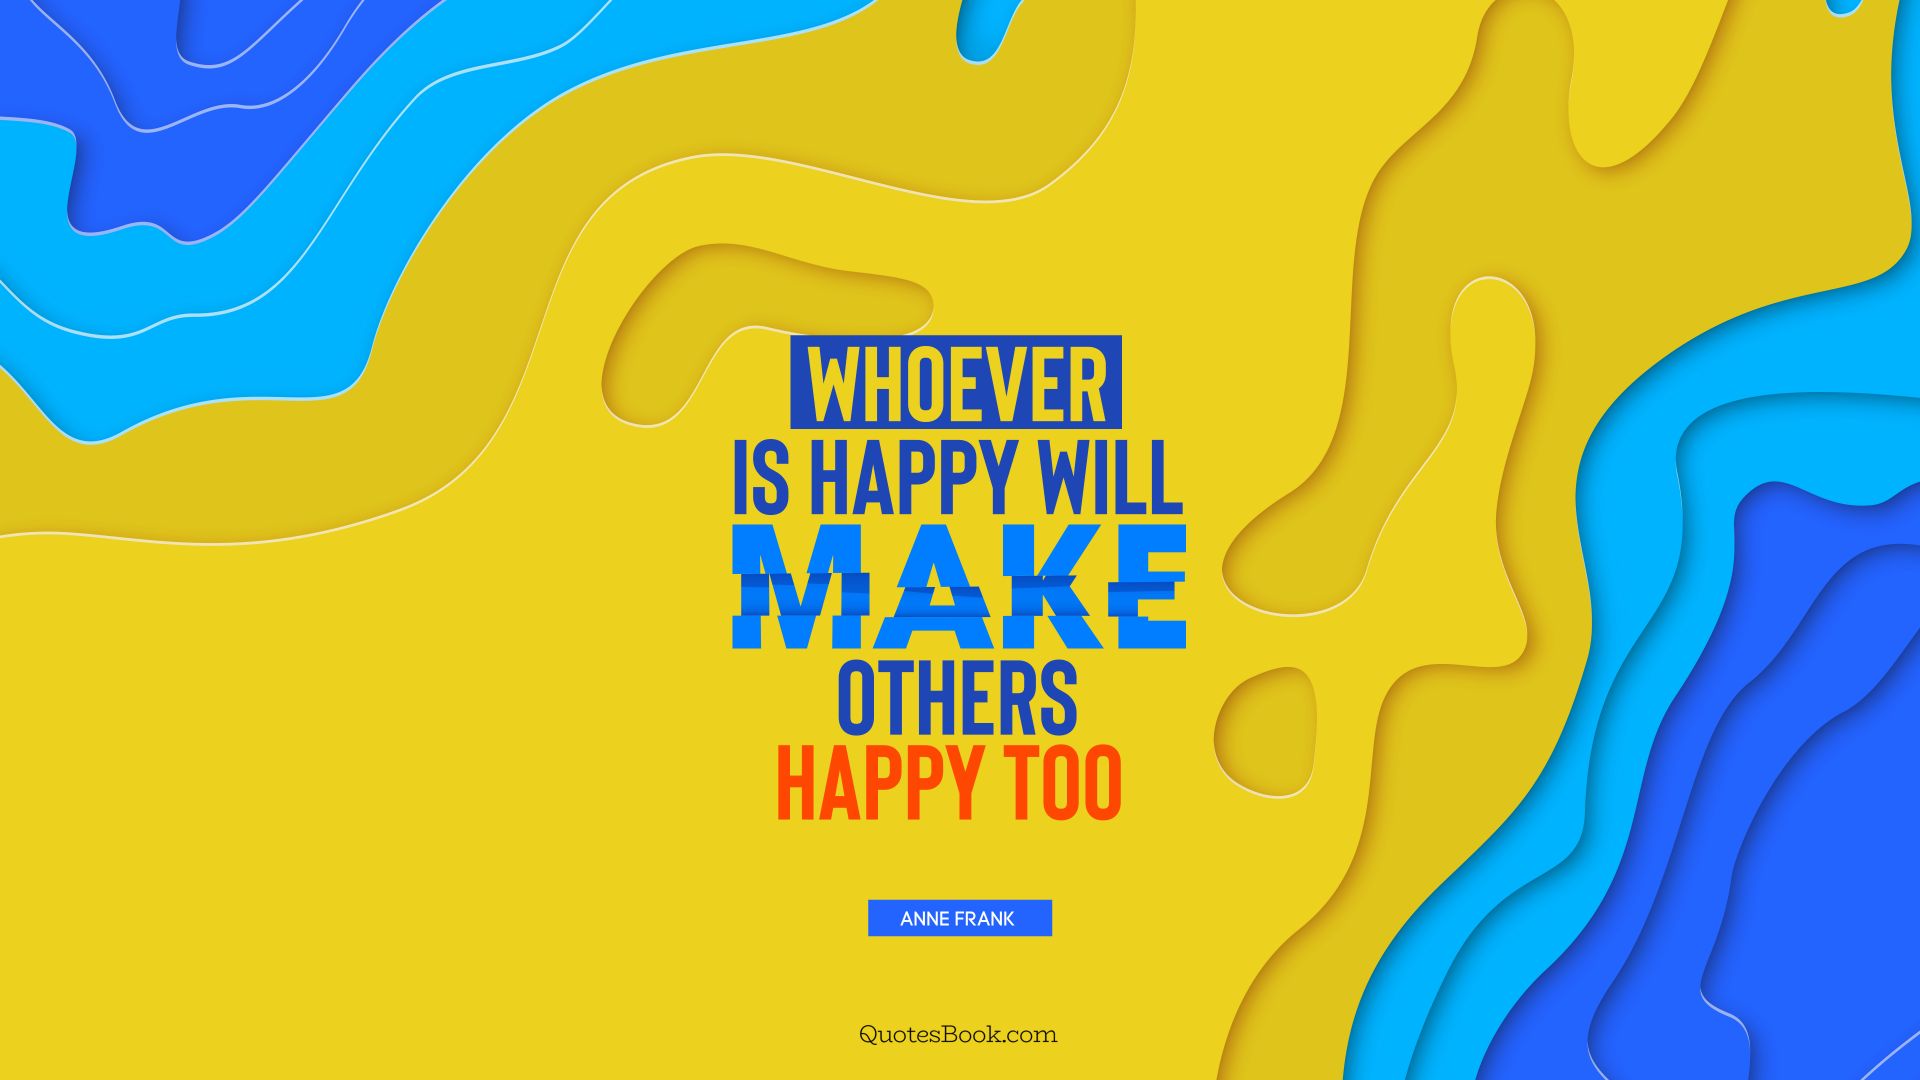 Whoever is happy will make others happy too . - Quote by Anne Frank